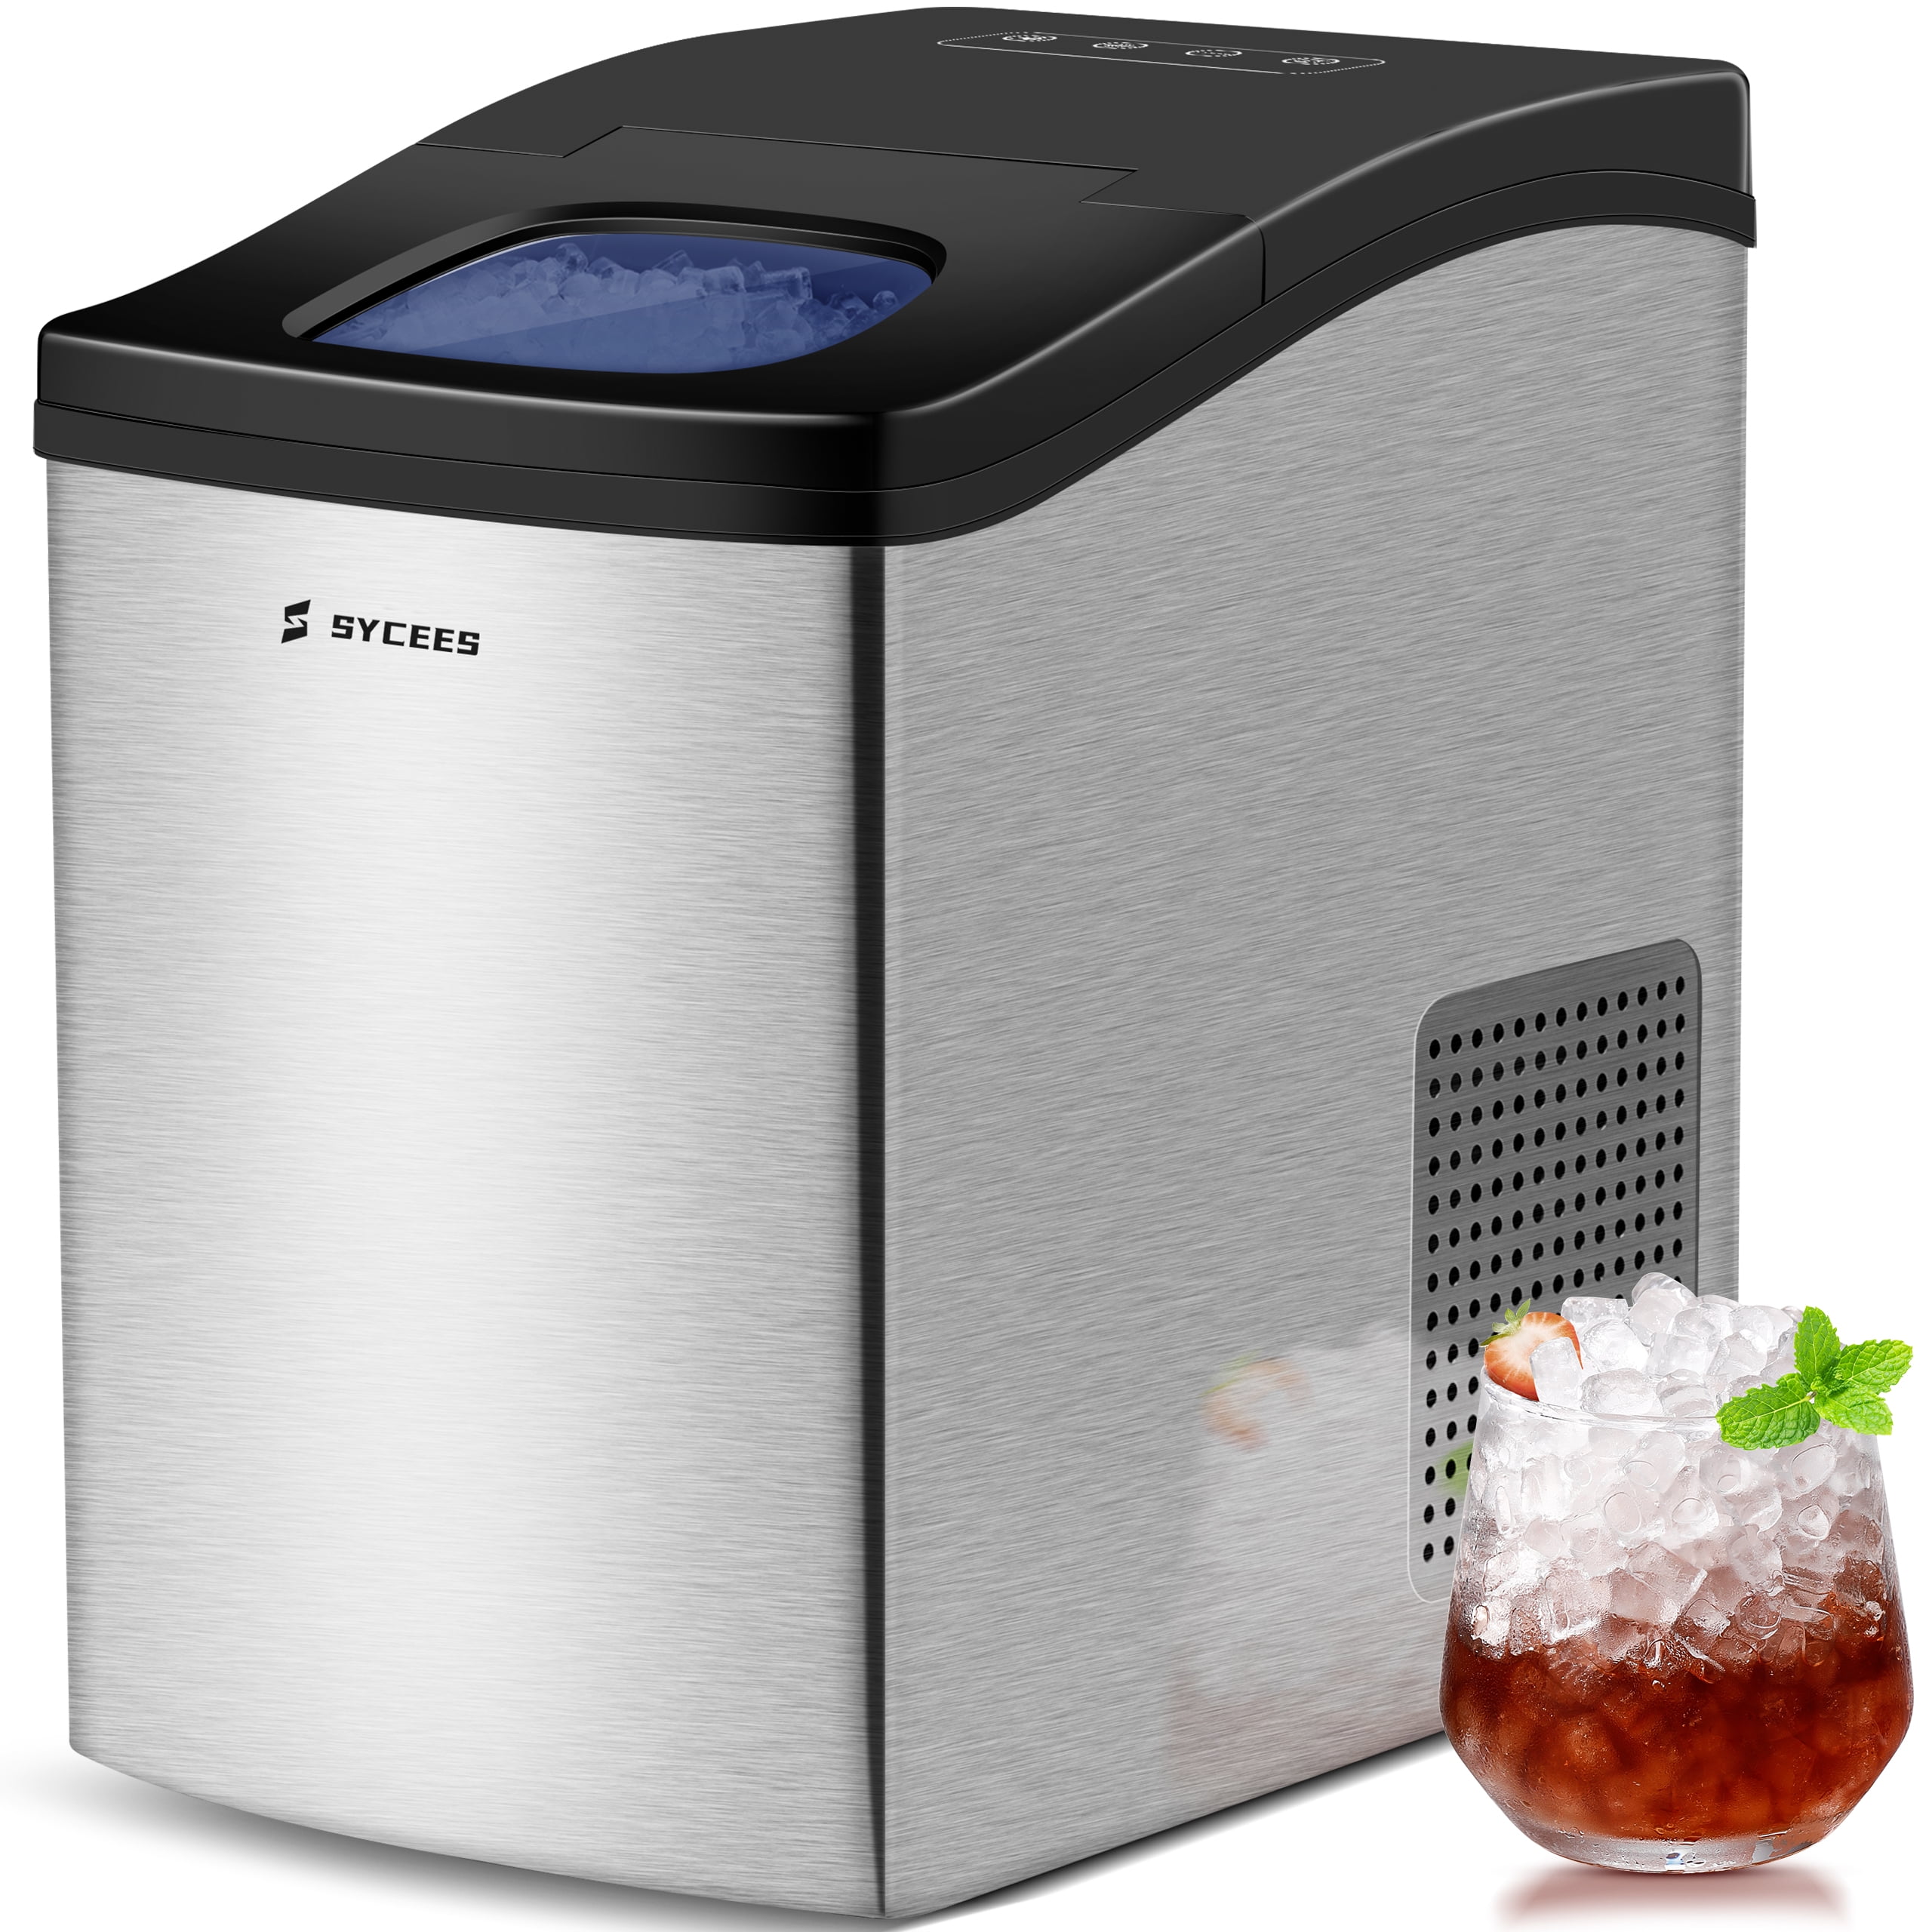 Sycees Portable Nugget Ice Maker for Countertop, 33lbs/24H, 5lbs Ice Storage, Pellet Ice Ready in 10 Mins, Self-Cleaning, Touch Control, Stainless